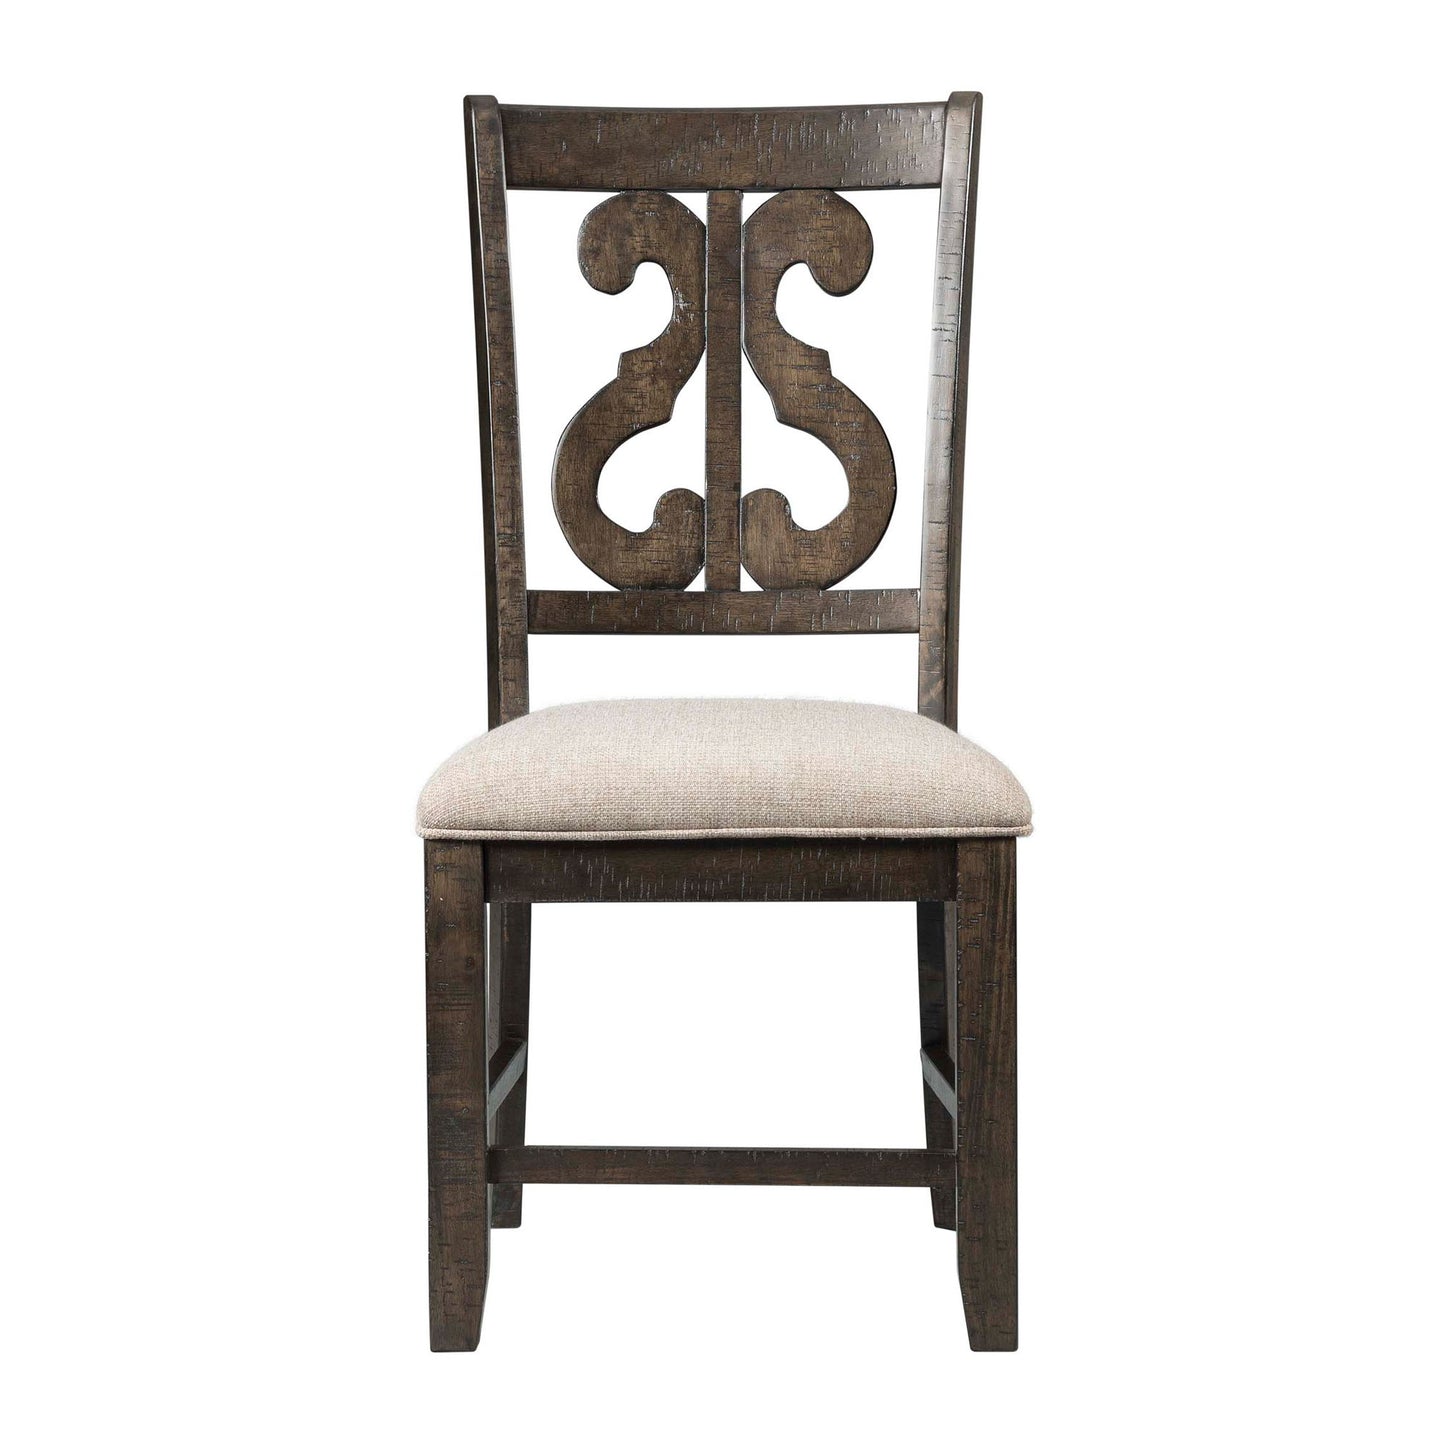 Stone - Wooden Swirl Back Side Chair (Set of 2)